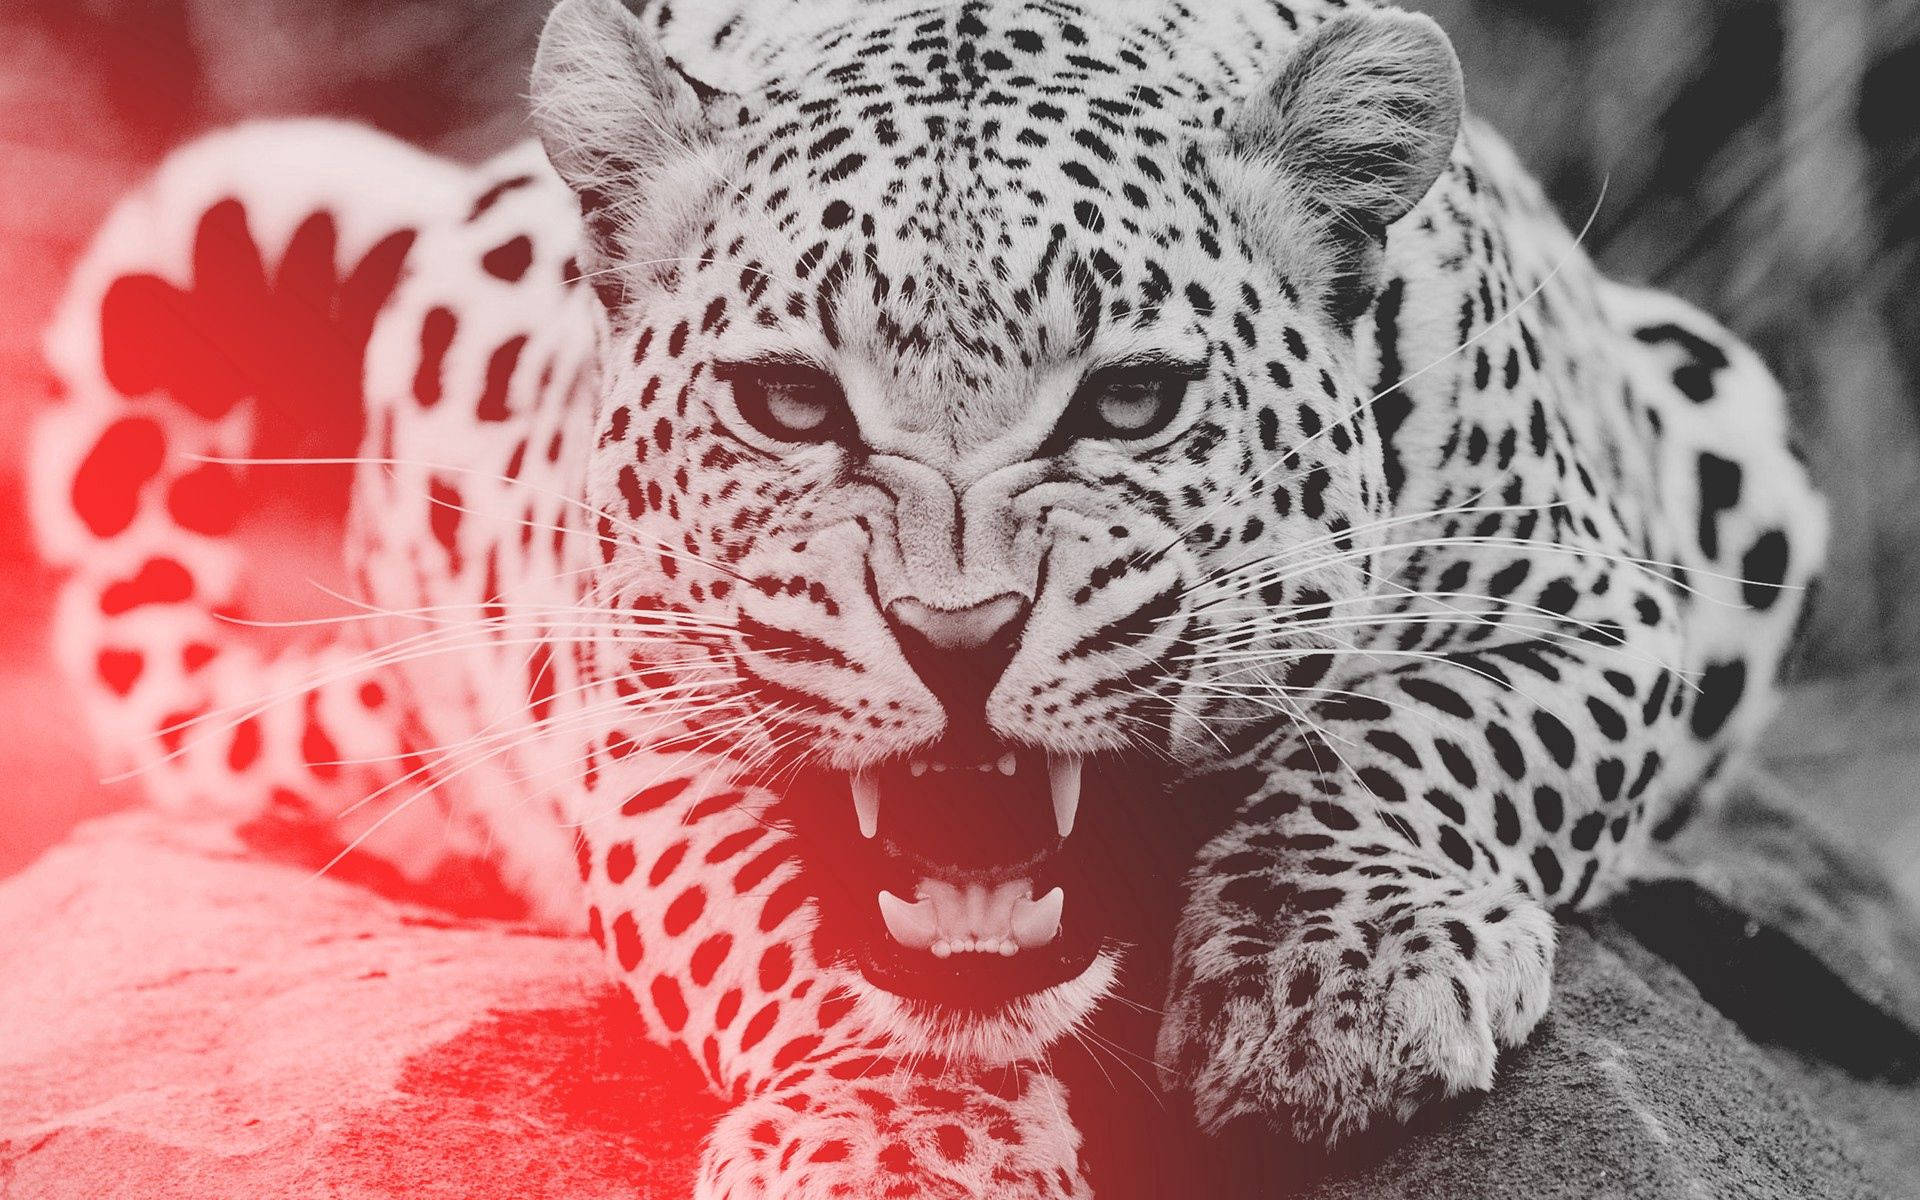 Leopard 1920X1200 Wallpaper and Background Image